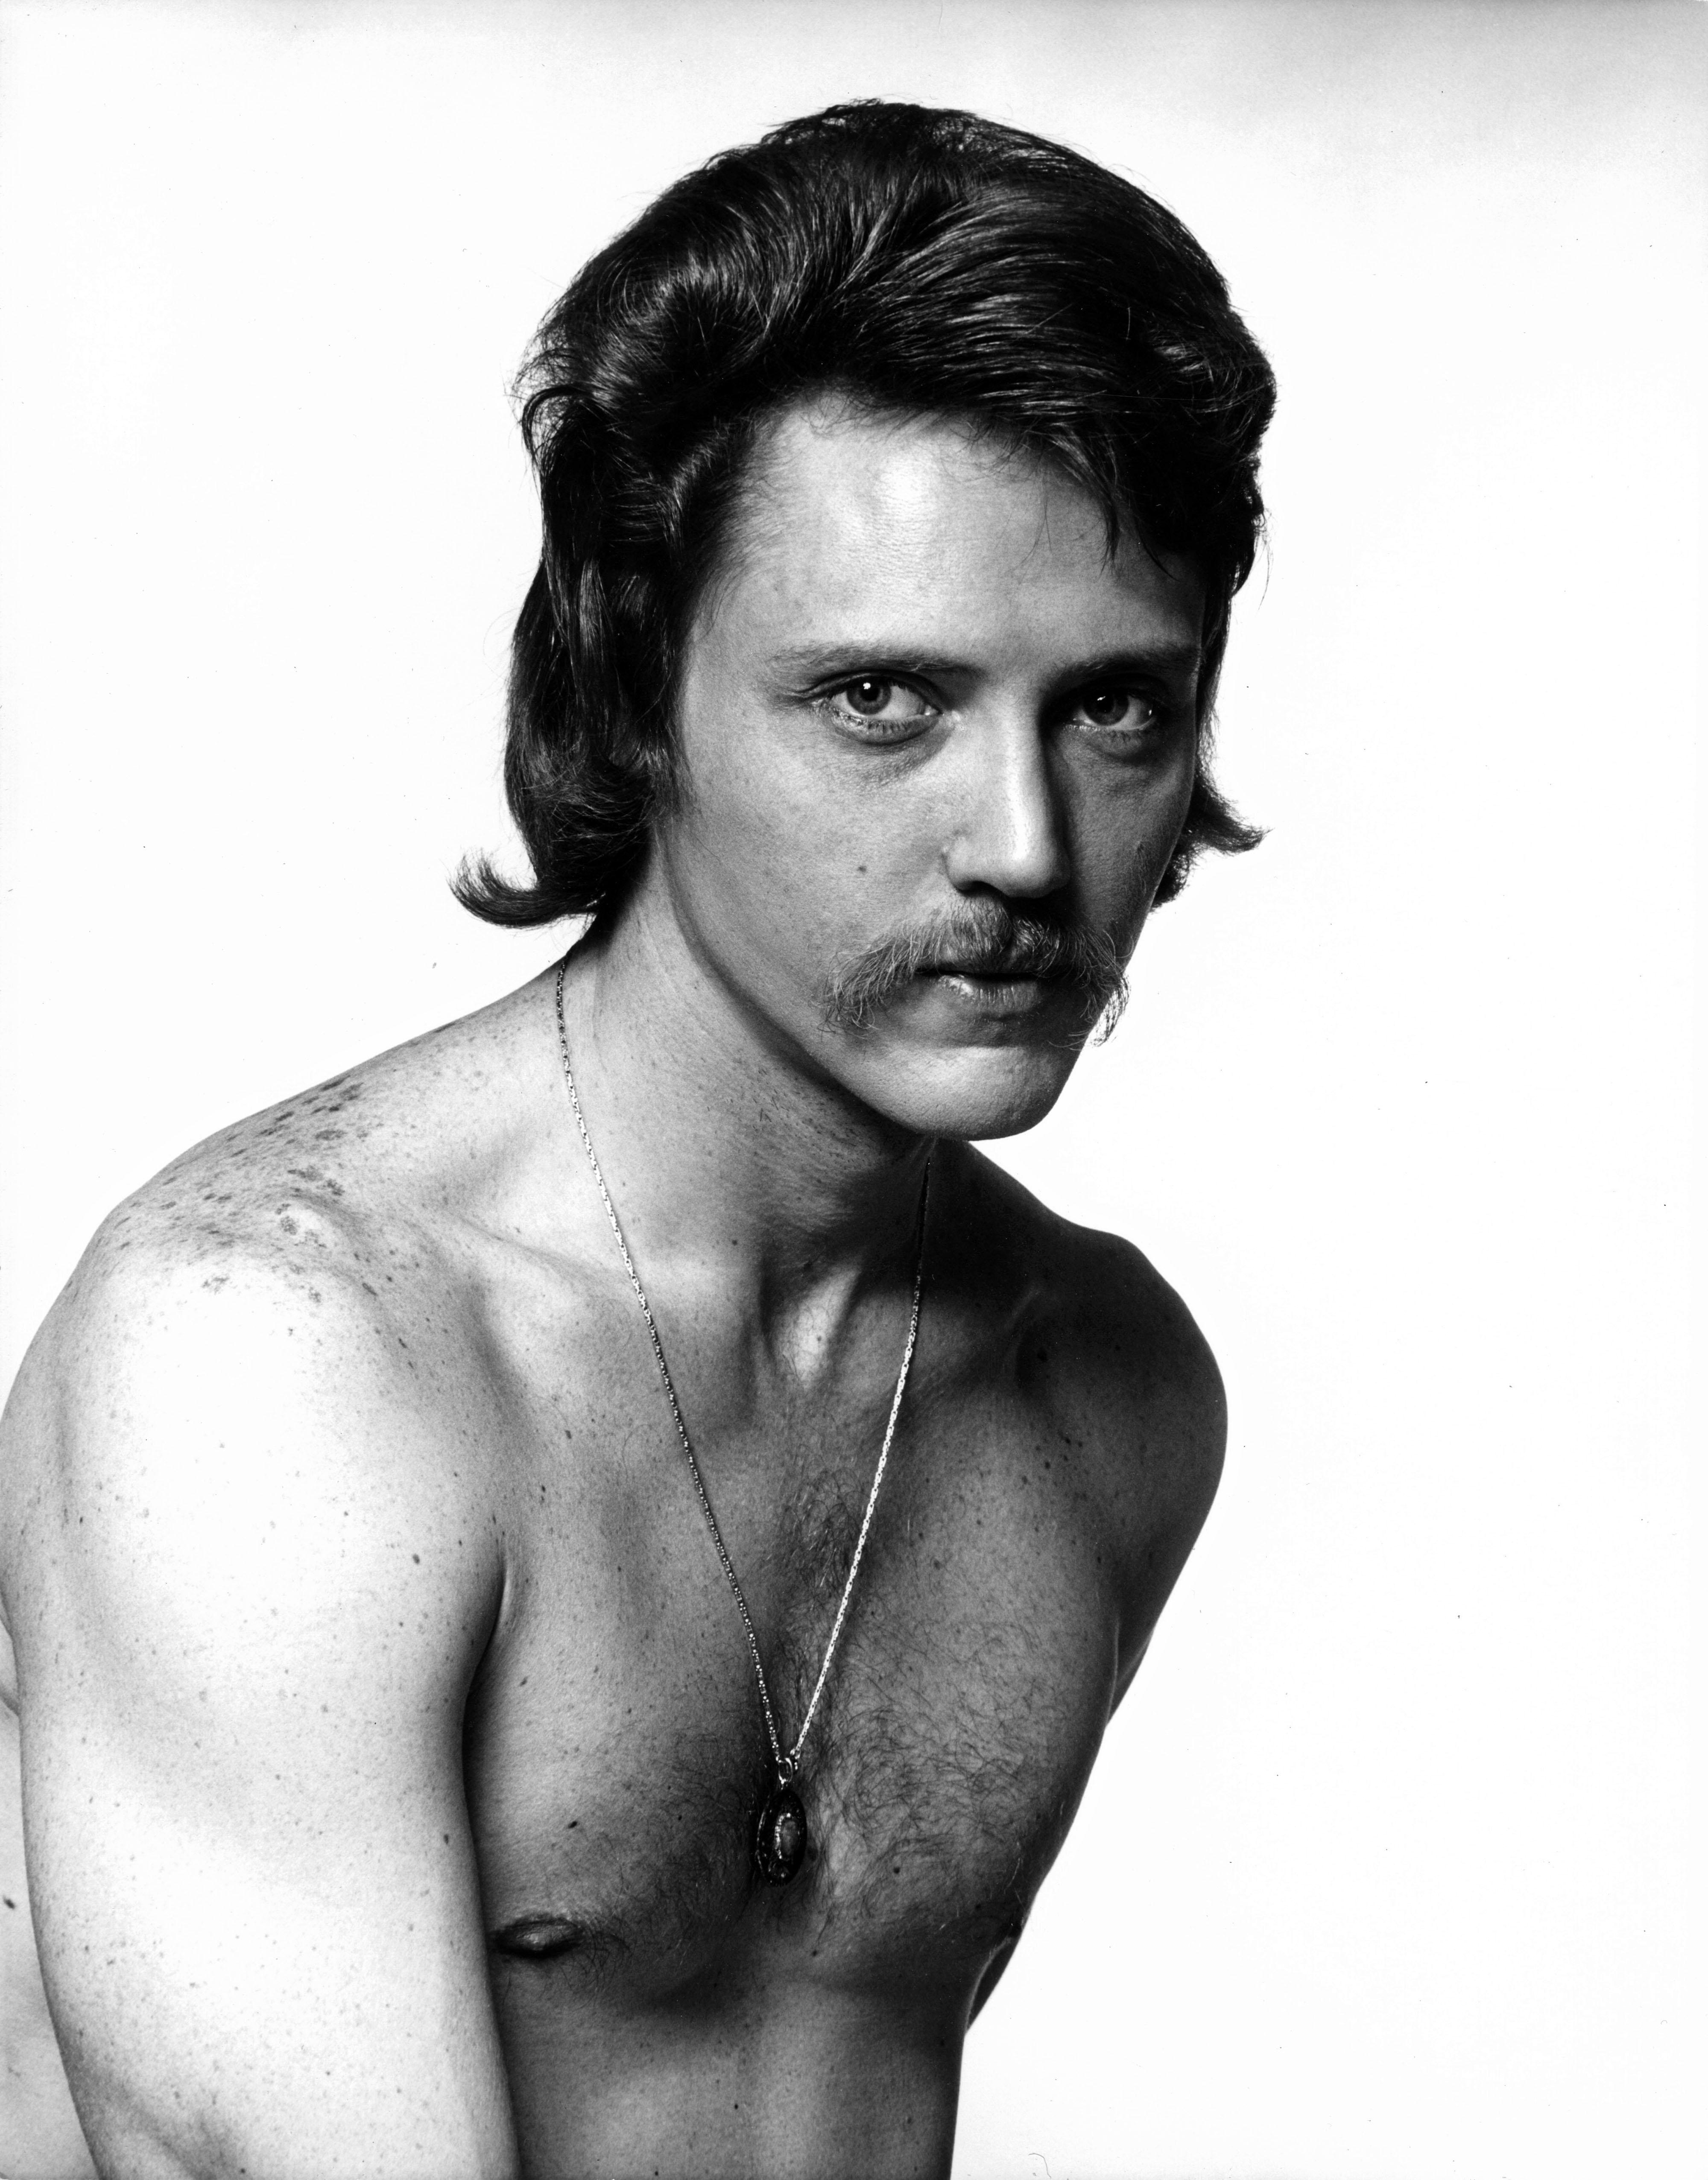 11 x 14" vintage silver gelatin photograph of actor Christopher Walken, 1973. Signed by Jack Mitchell on the verso.  Comes directly from the Jack Mitchell Archives with a certificate of authenticity.

 Jack Mitchell, (1925-2013) bulging photographic